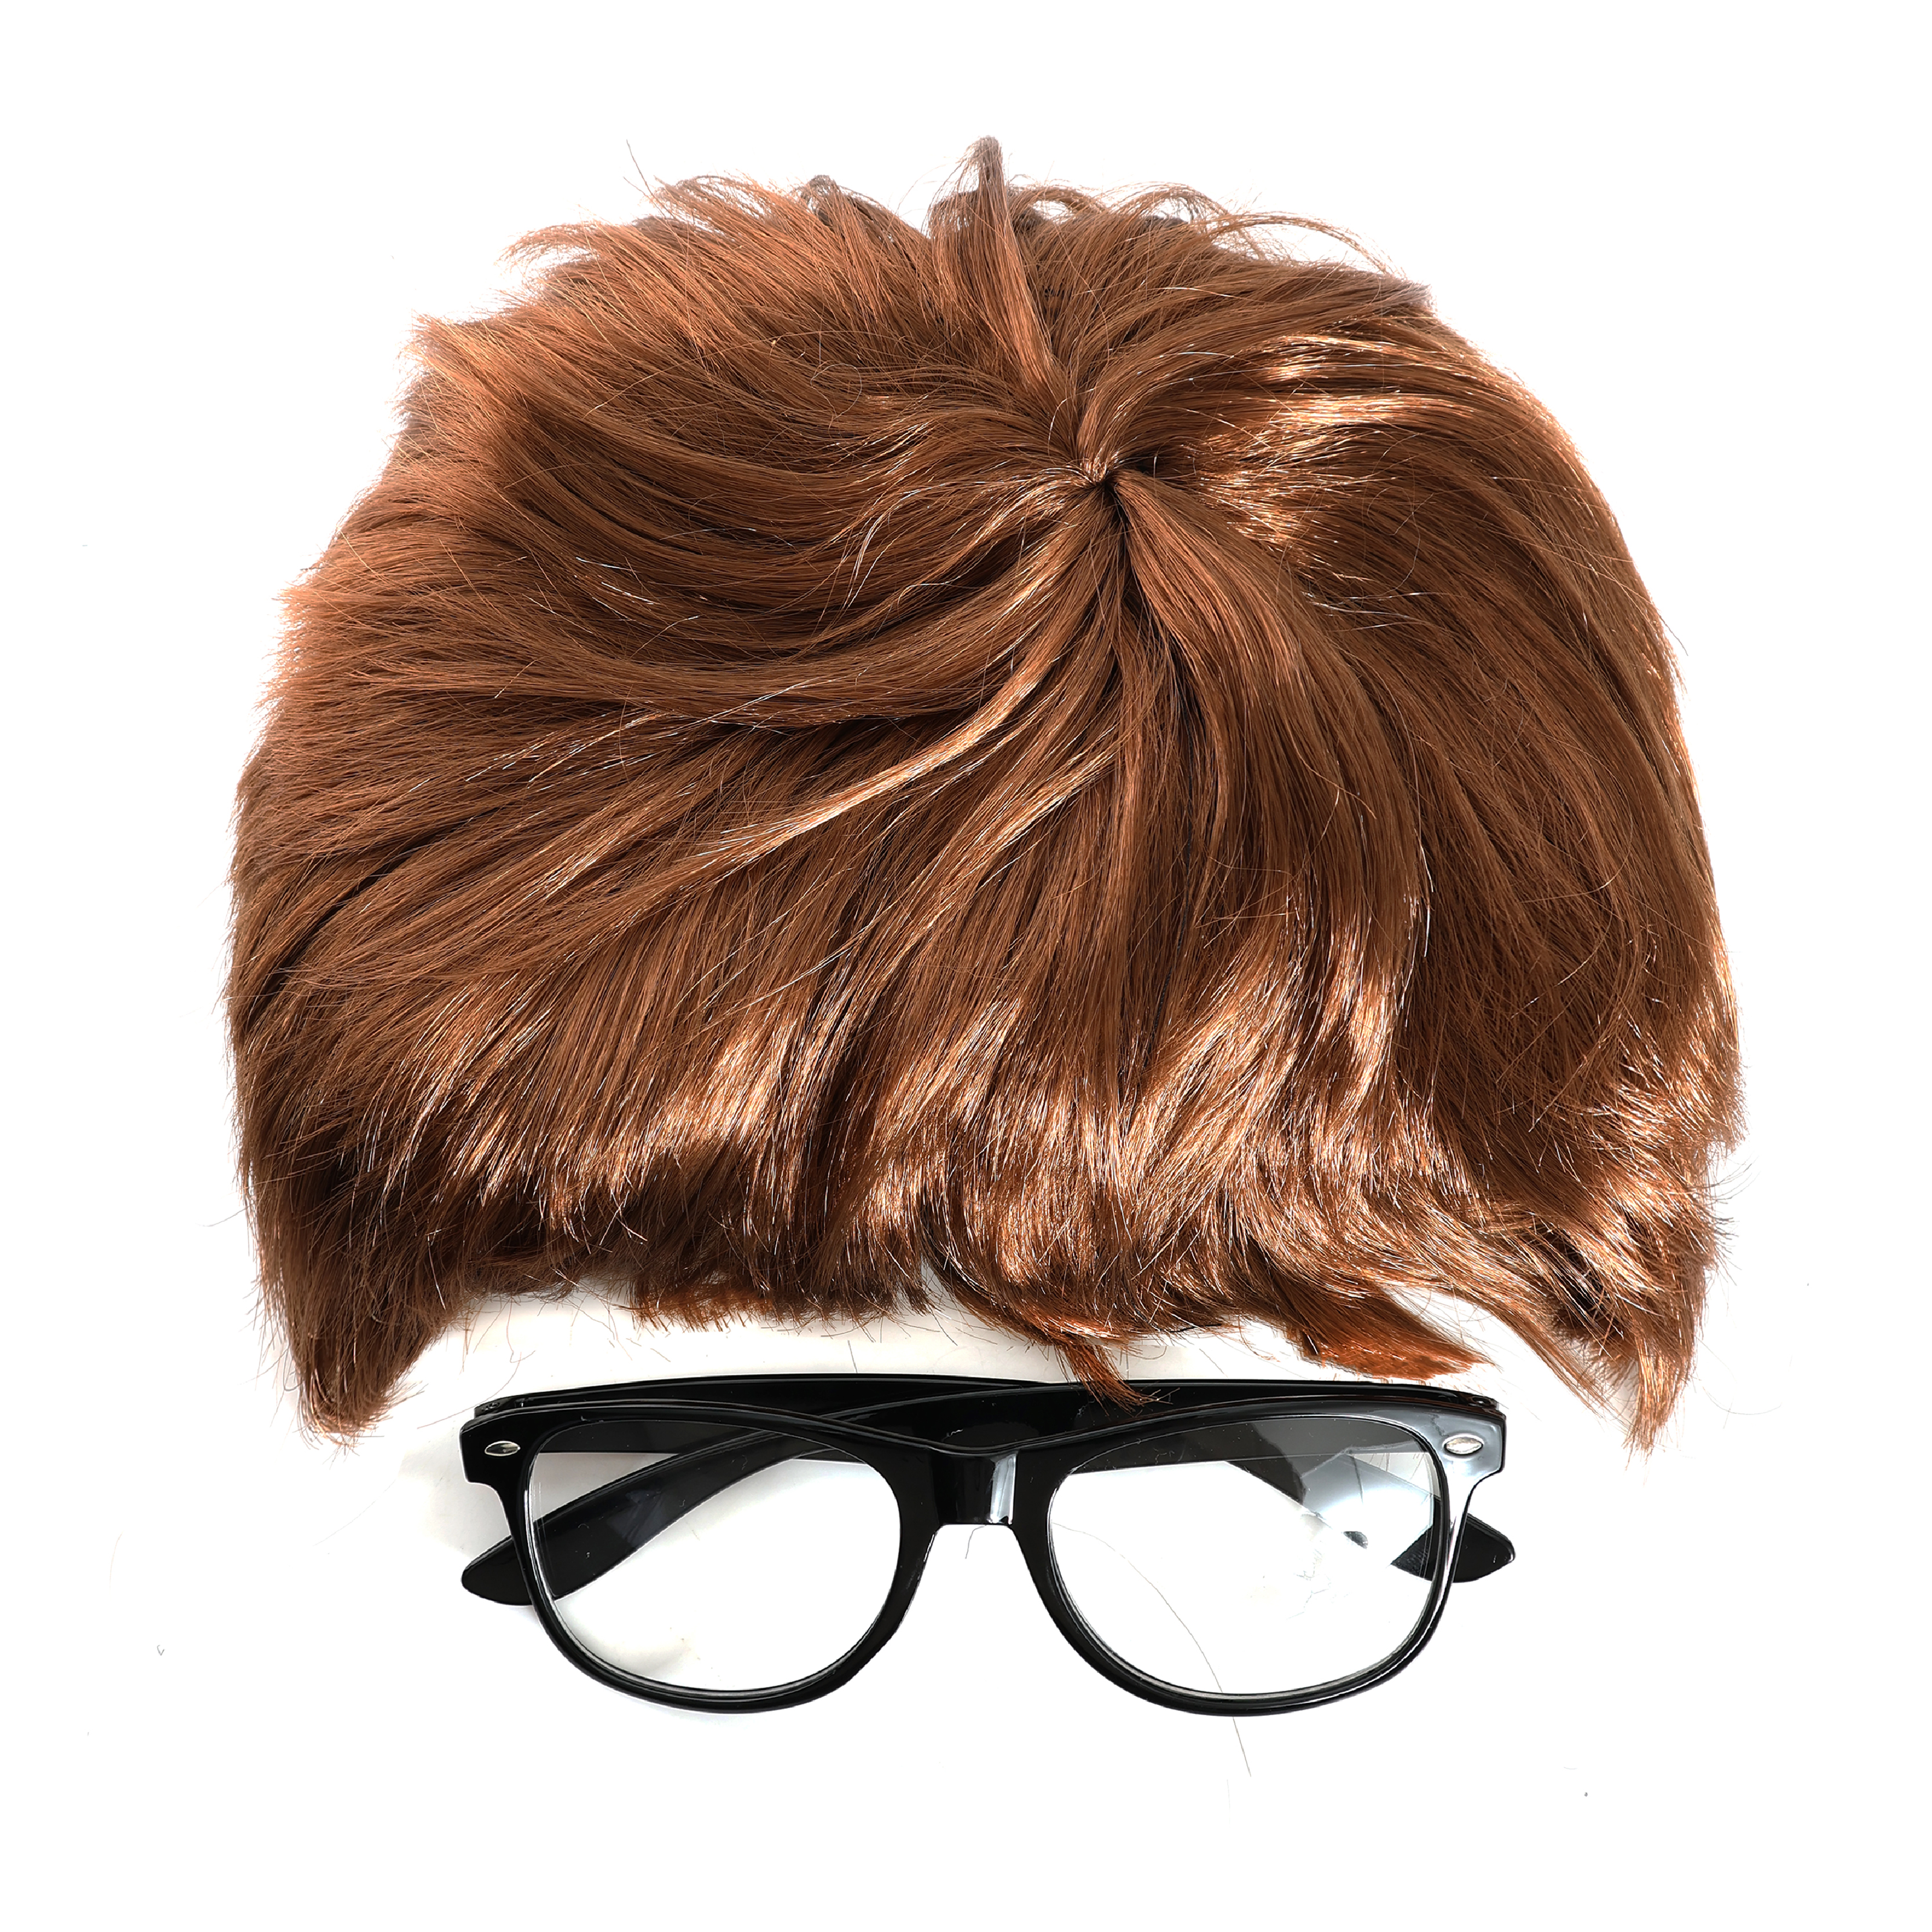 Austin Powers 60s Fancy Dress Costume Kit Inc Brown Wig and Black